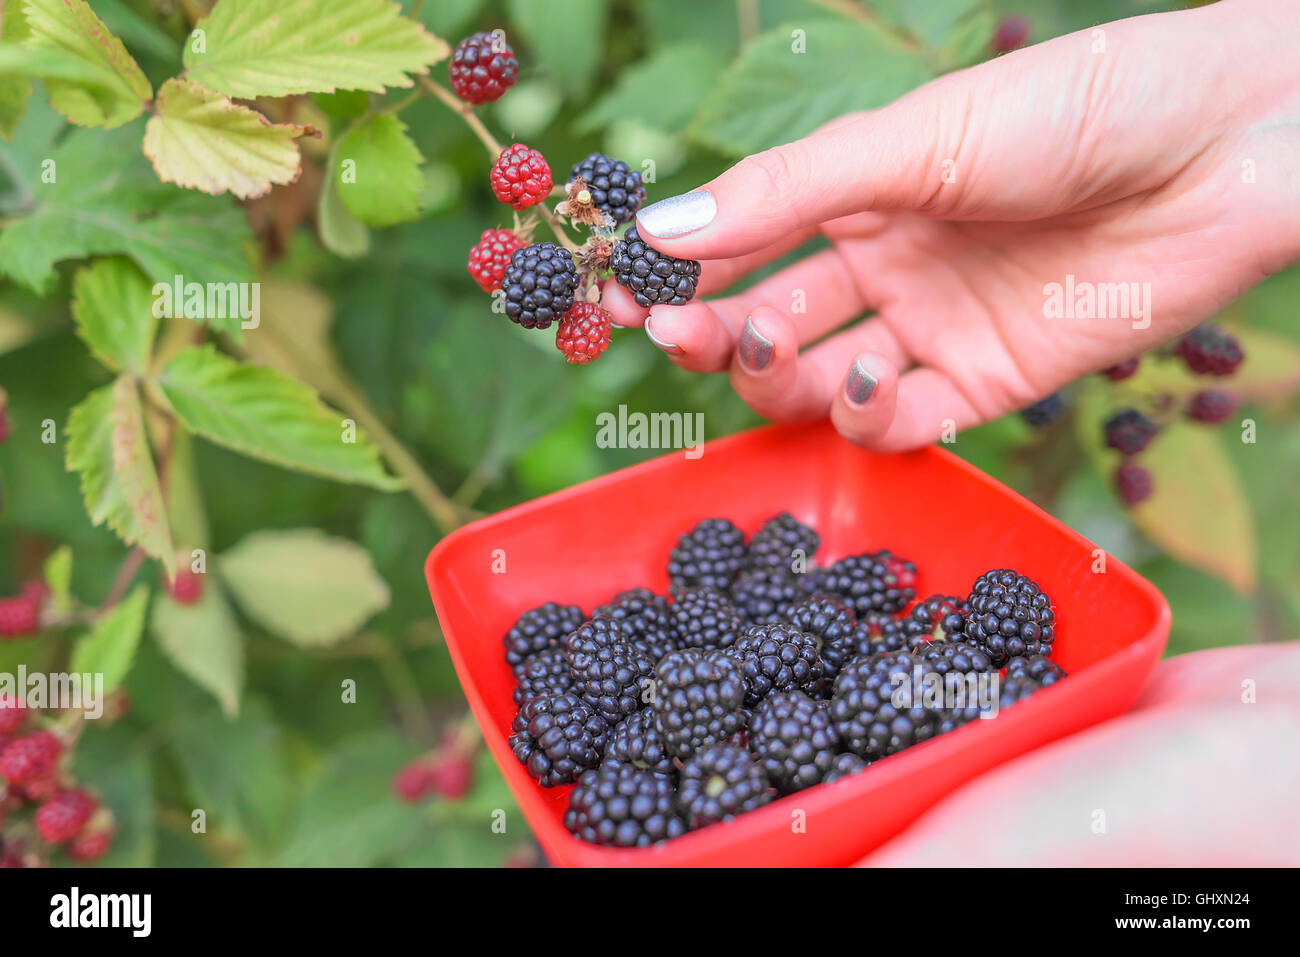 Female hand harvested blackberry into a bowl. Stock Photo